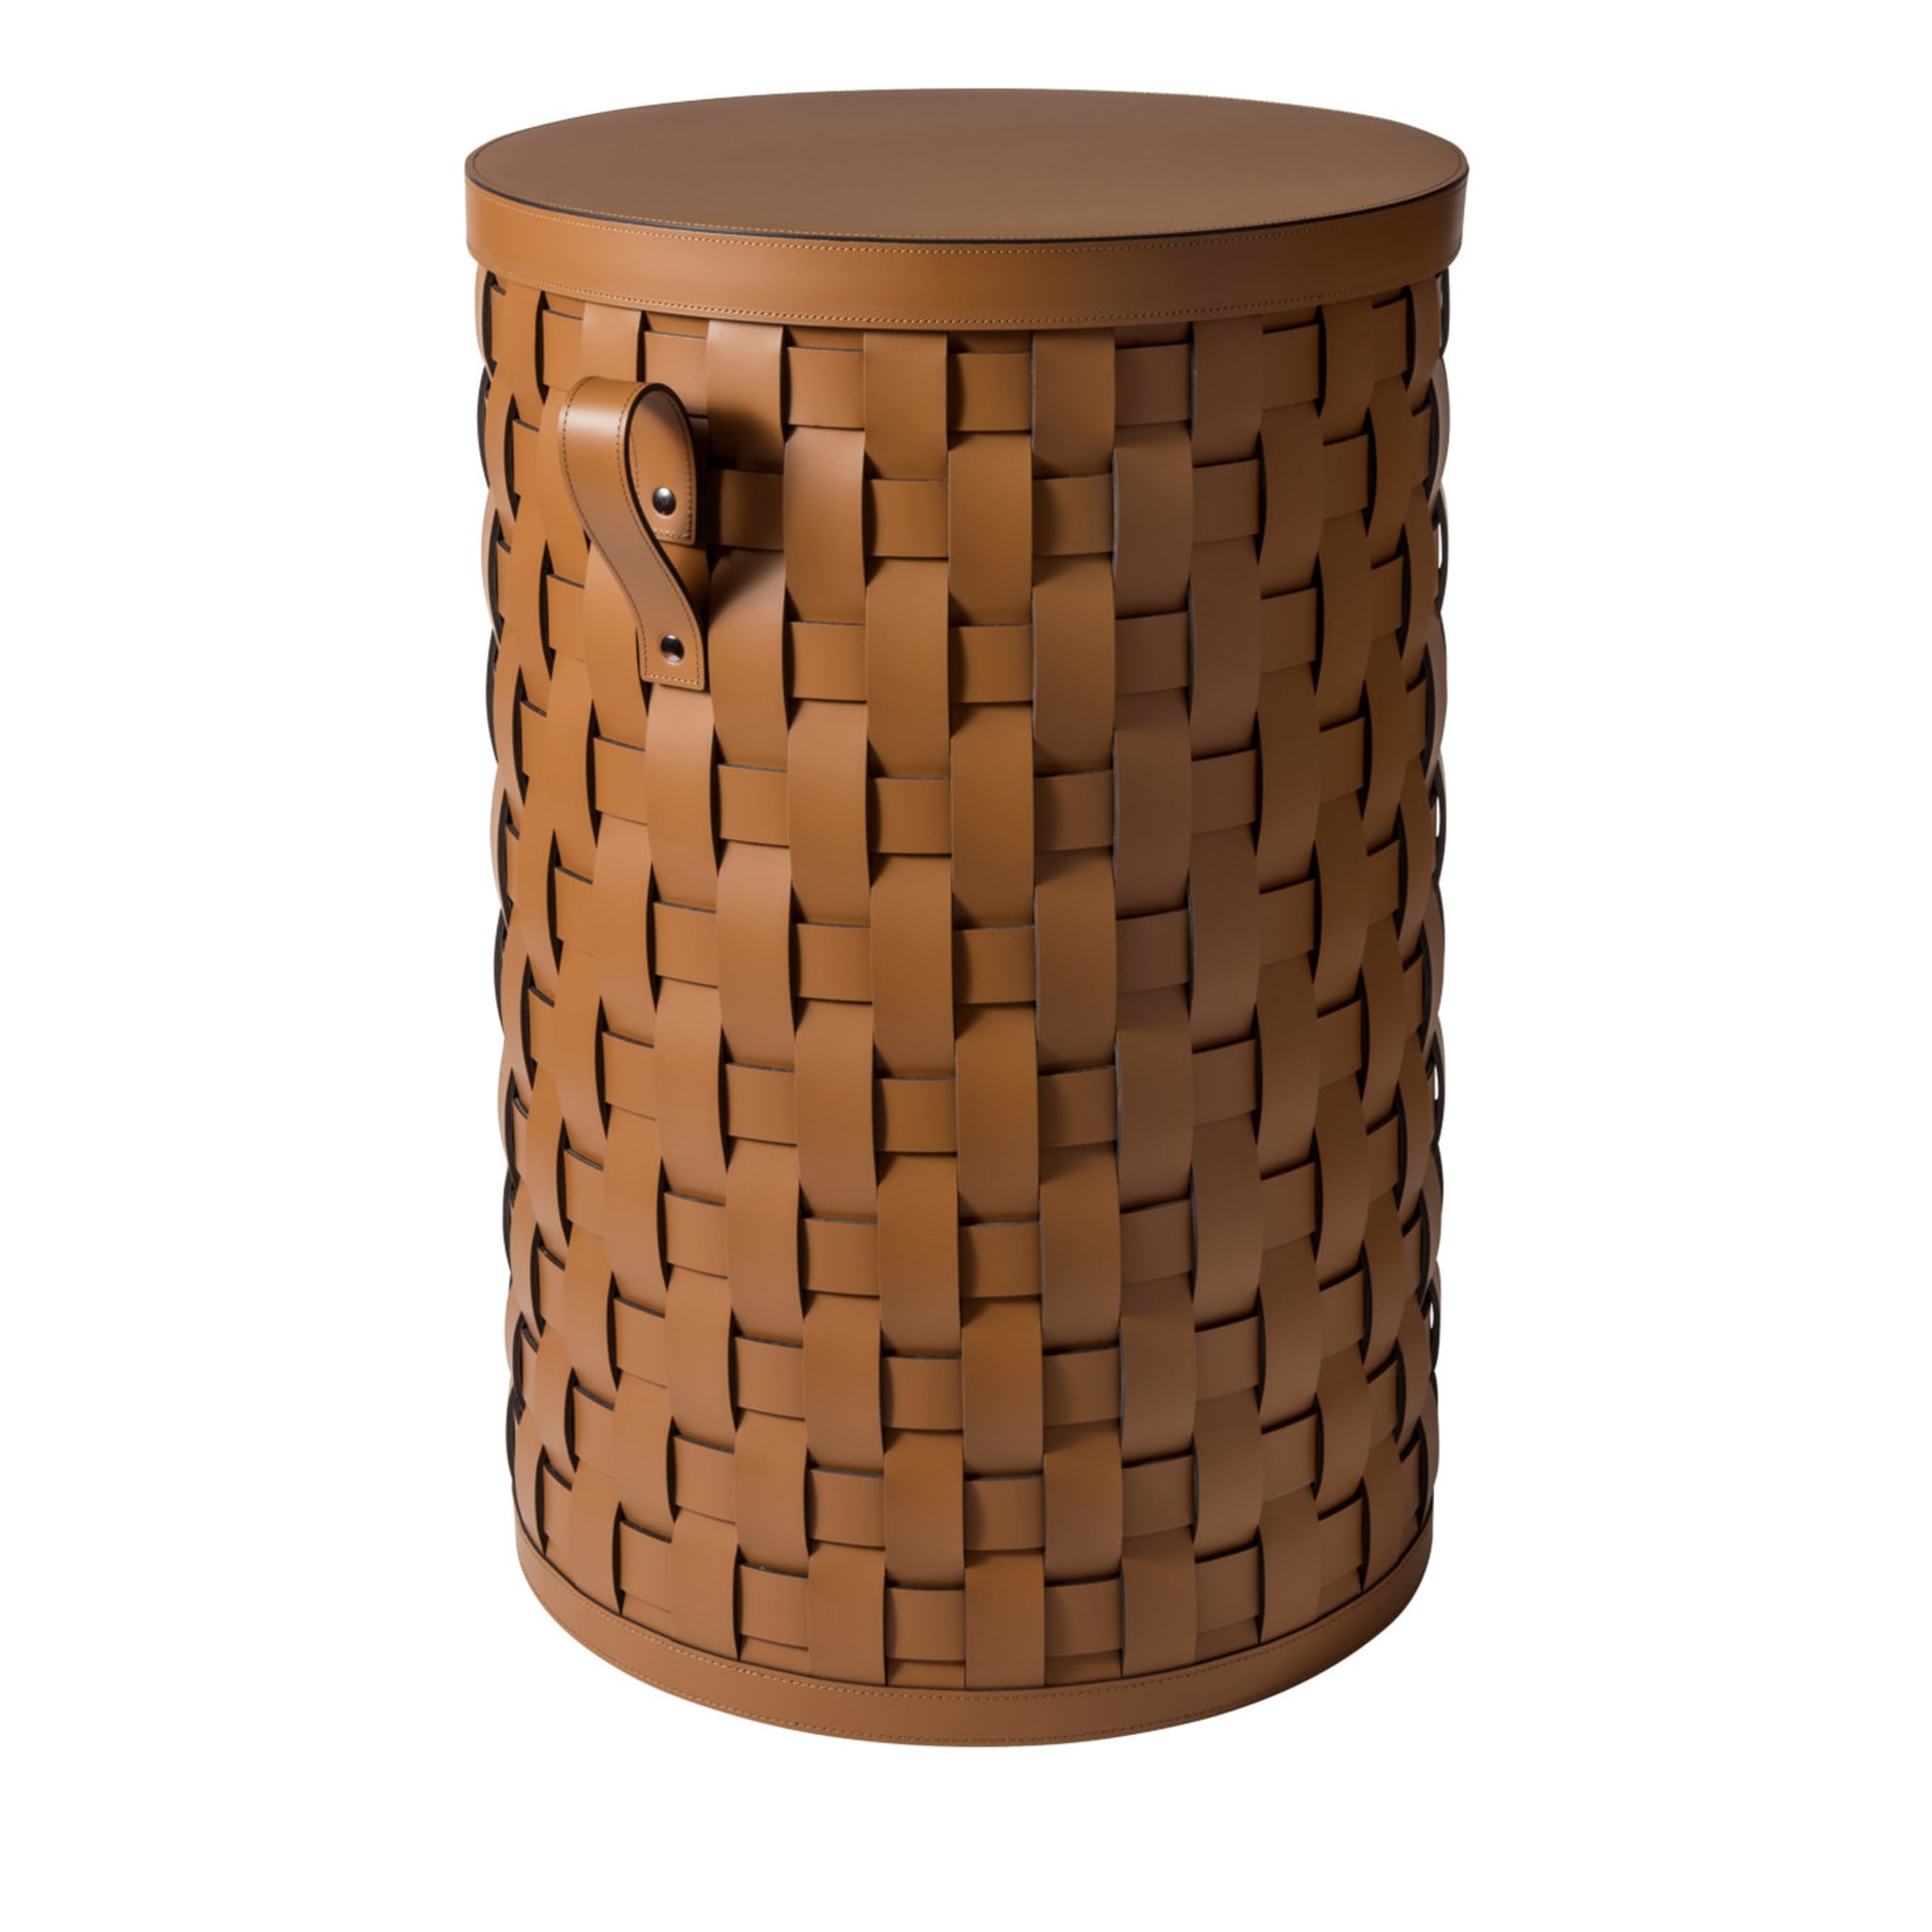 Demetra Tan Round Tall Basket with lid - Main view